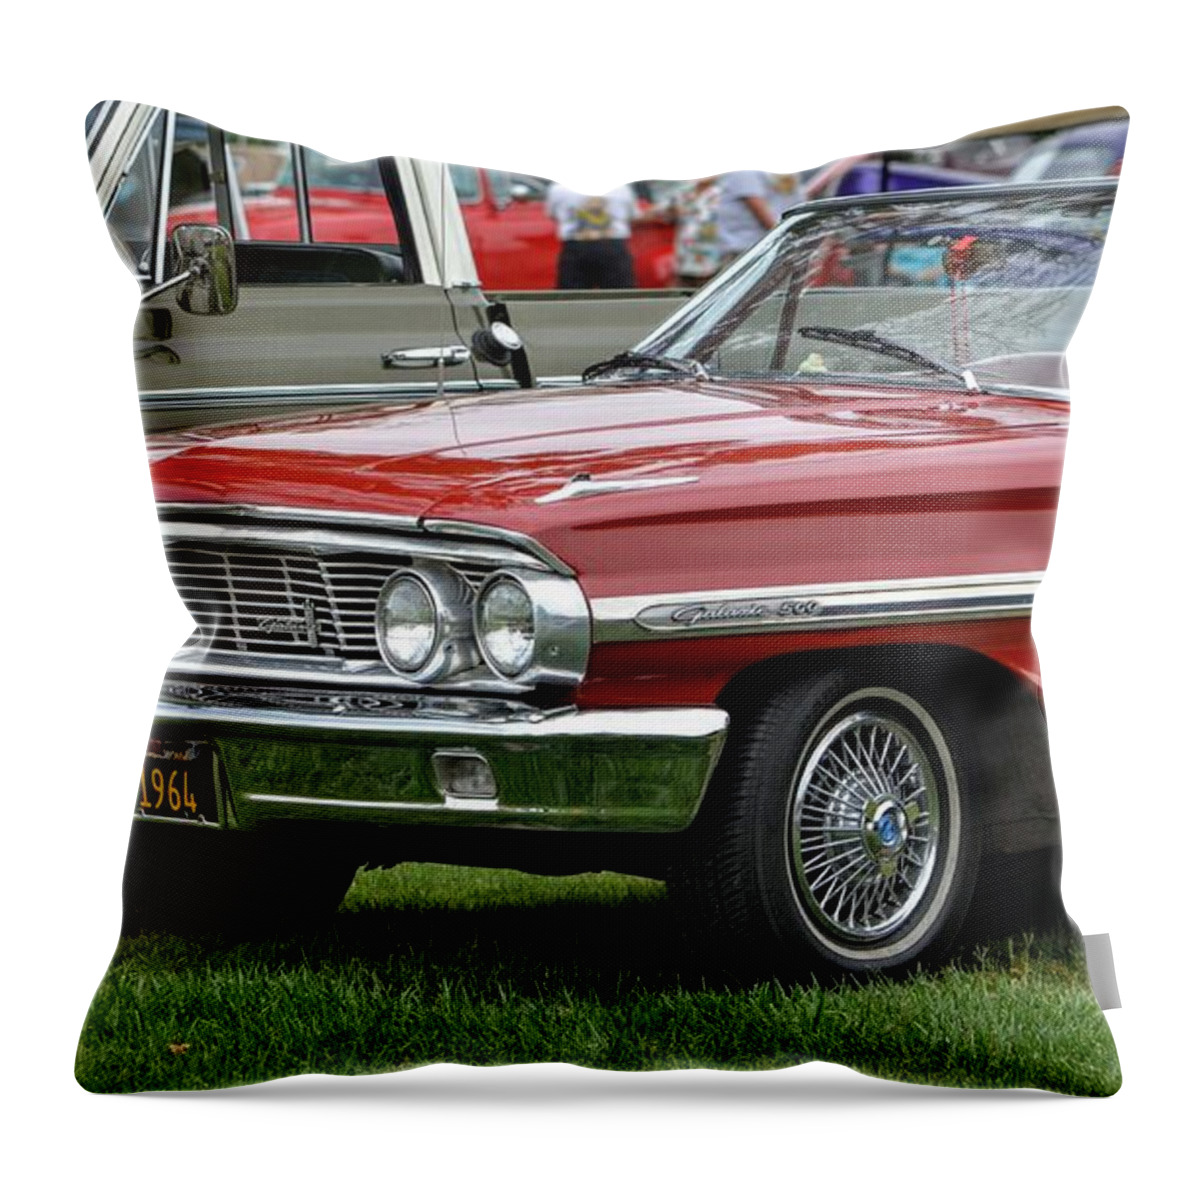 Original Throw Pillow featuring the photograph Classic Ford  by Dean Ferreira